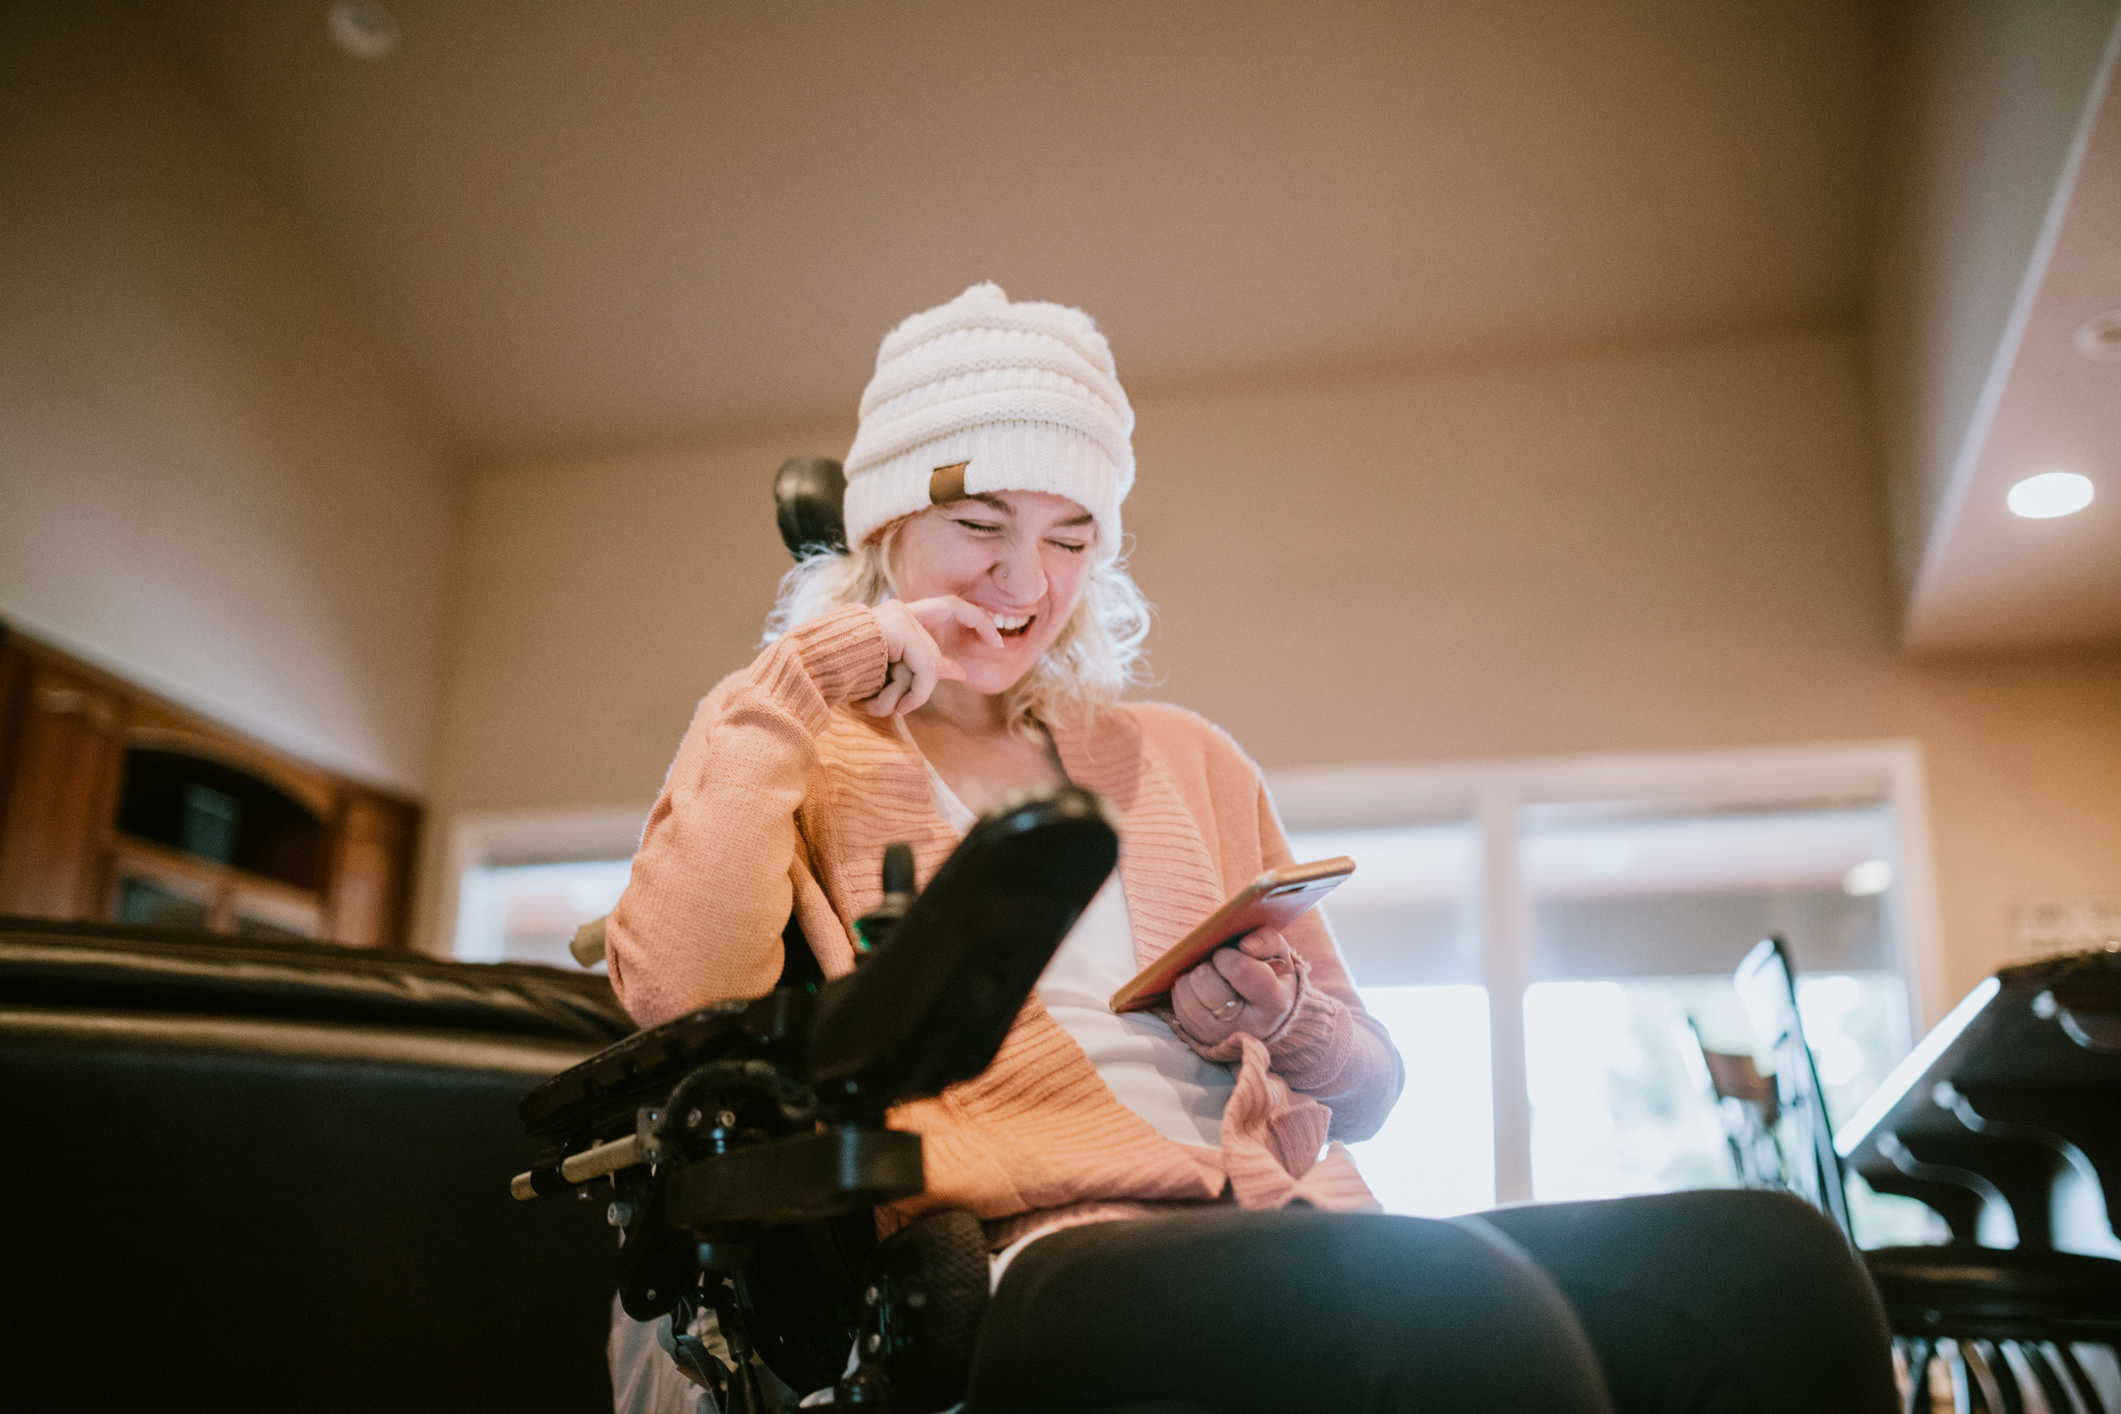 An independent young adult woman with cerebral palsy going about some of her daily routines at home. She smiles while browsing social media apps on her phone.